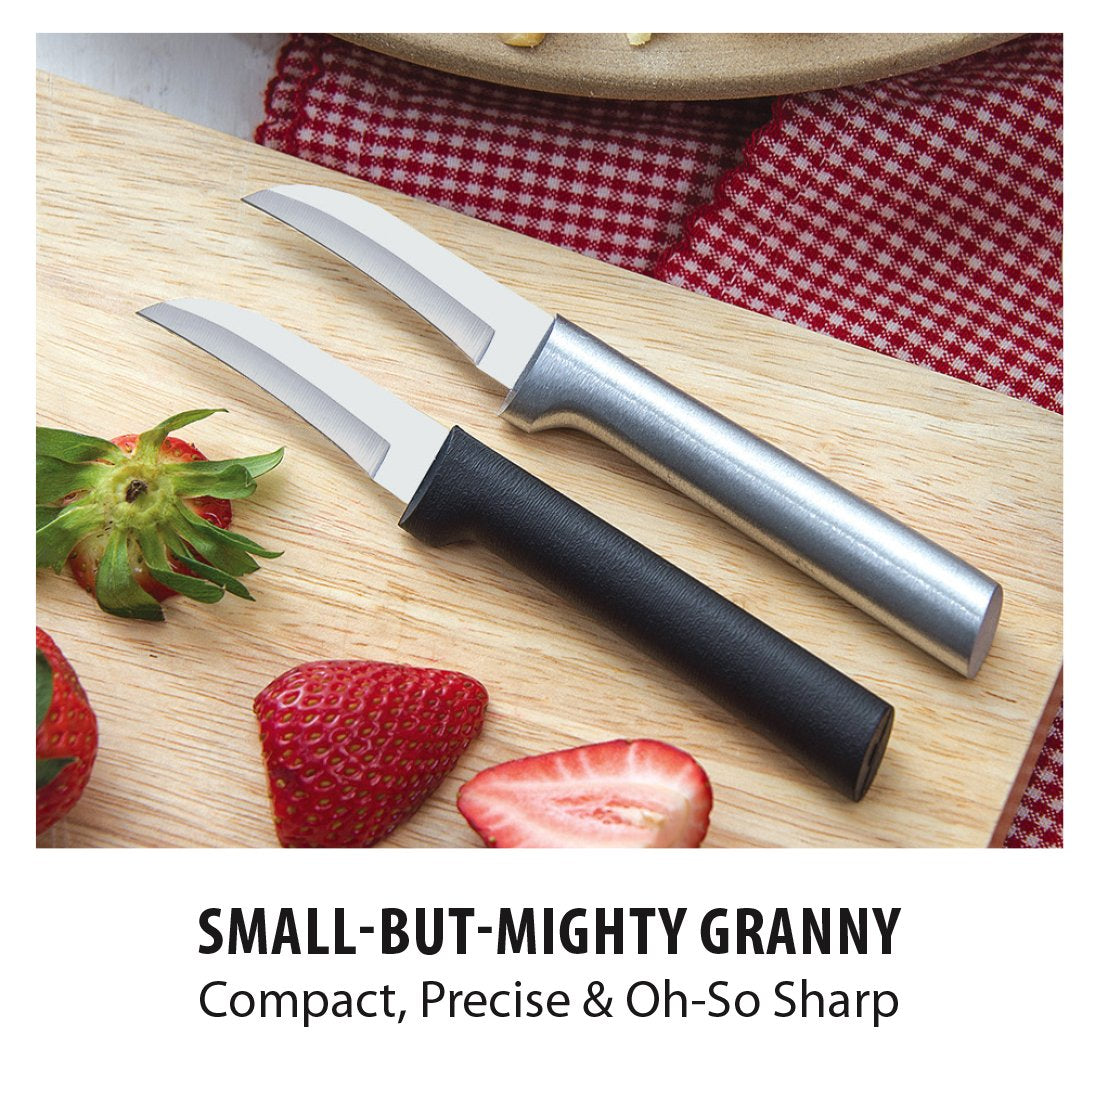 Curved "Granny" Paring Knife